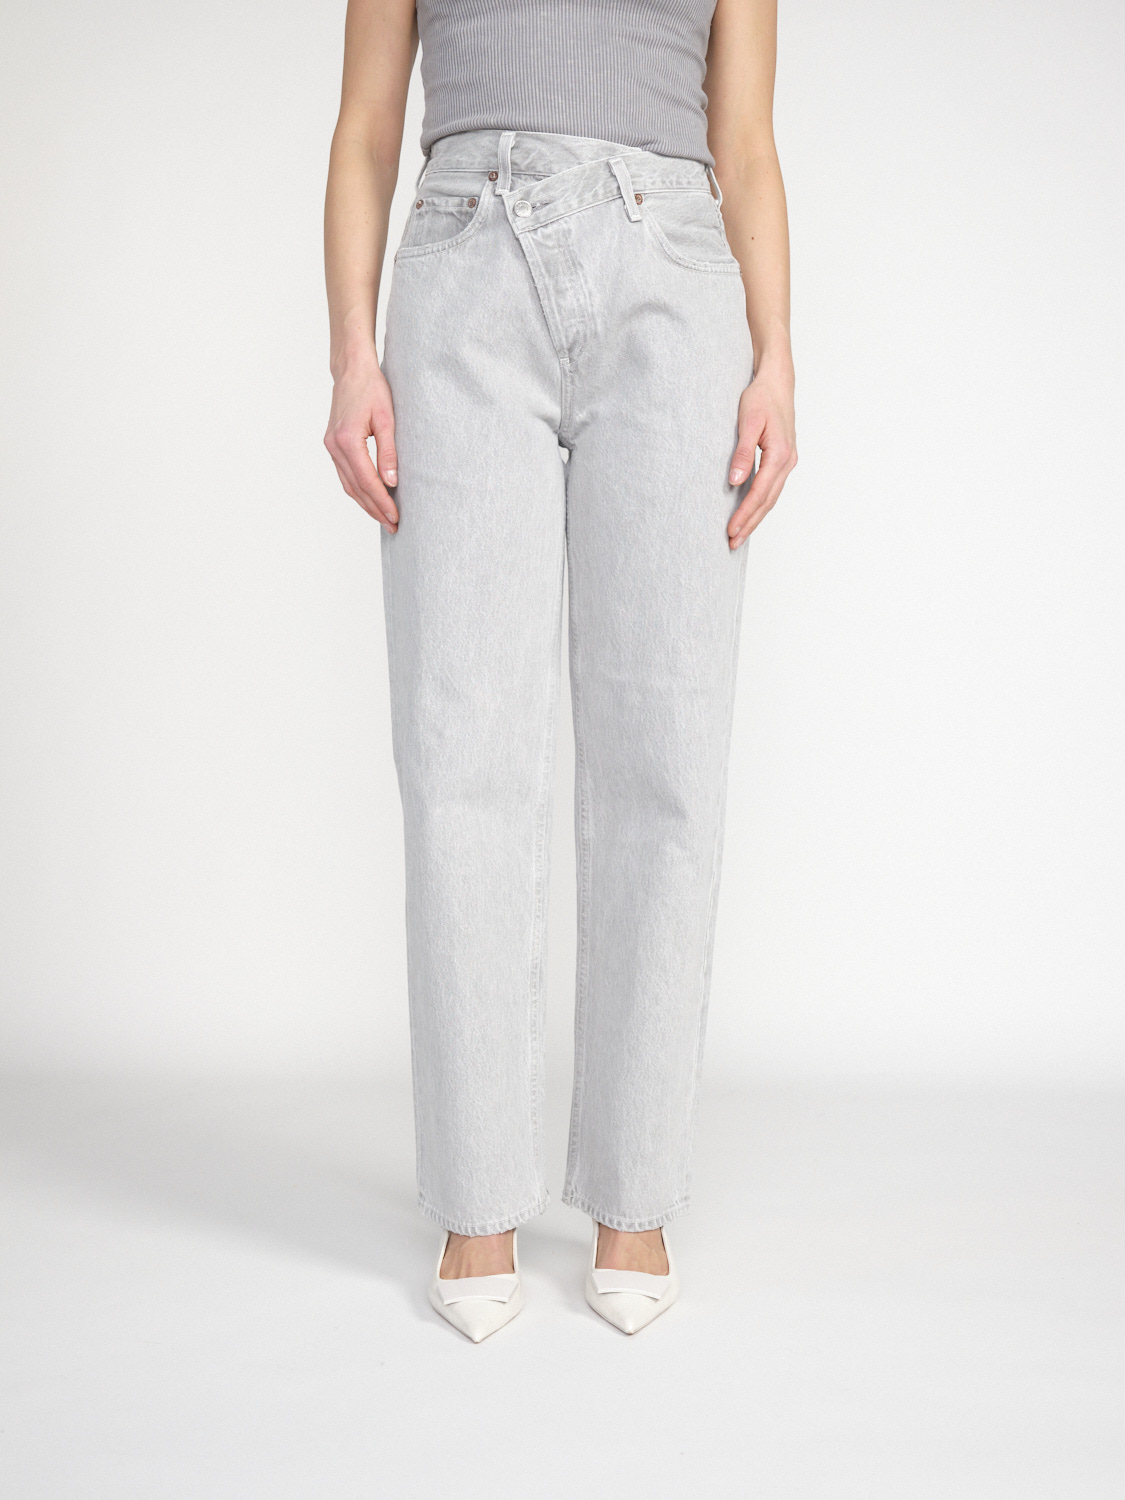 Agolde Criss Cross - cotton mom jeans with diagonal closure  grey 25